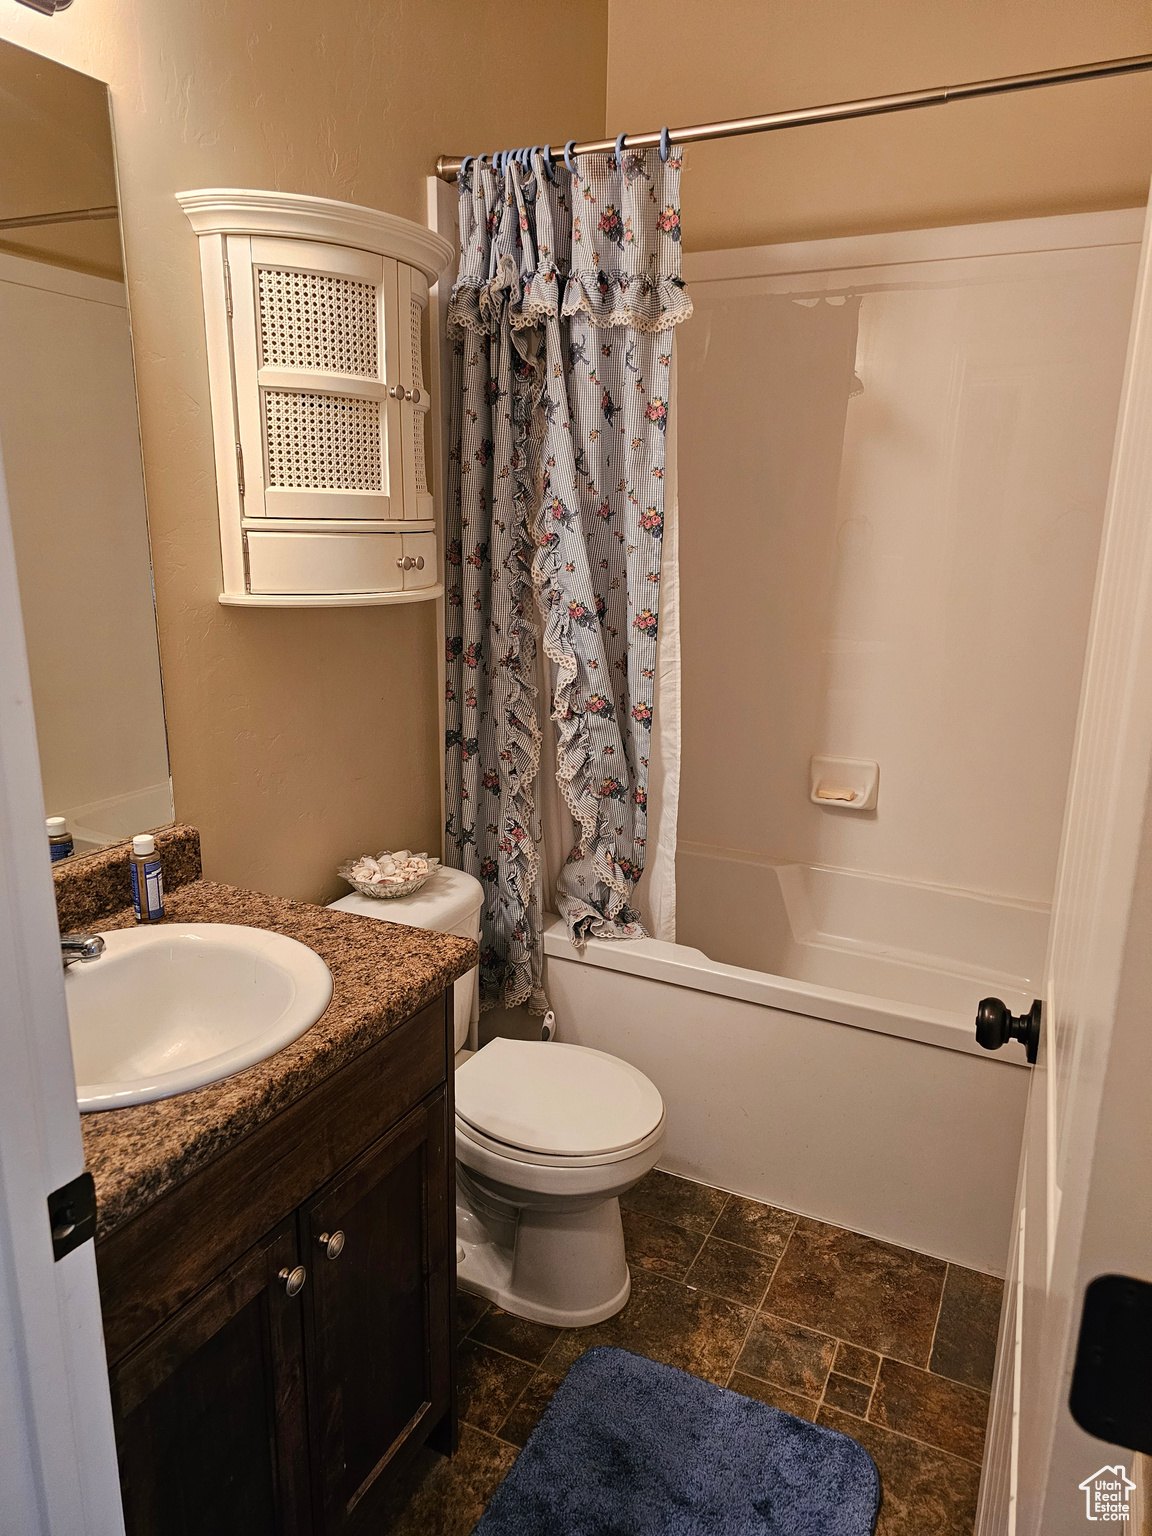 Full bathroom featuring vanity with extensive cabinet space, toilet, tile floors, and shower / bathtub combination with curtain